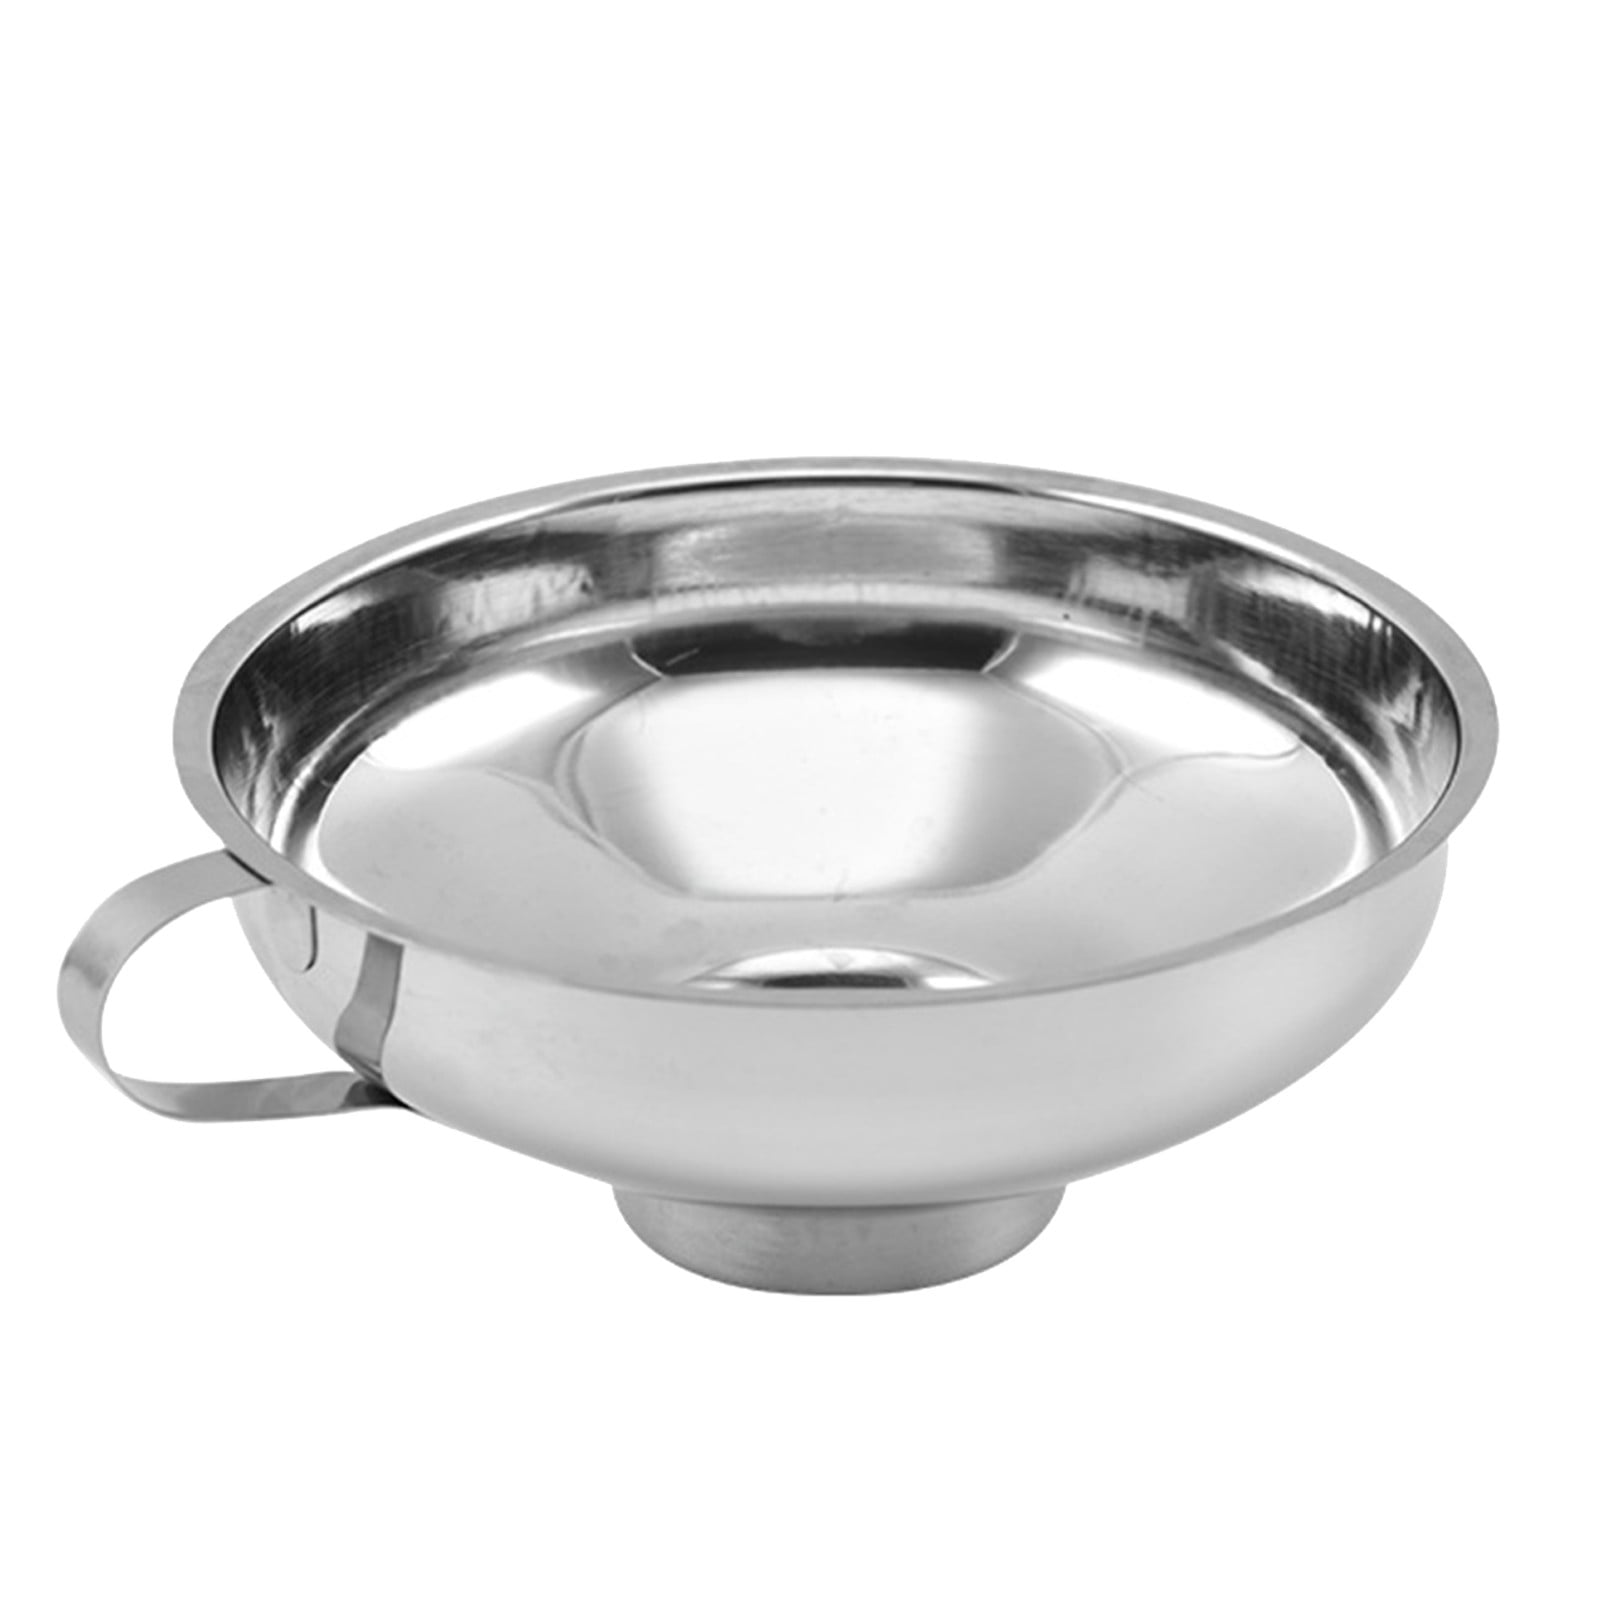 Wefuesd Stainless Steel Canning Funnel Wide Mouth Wide Mouth Jar Funnel ...